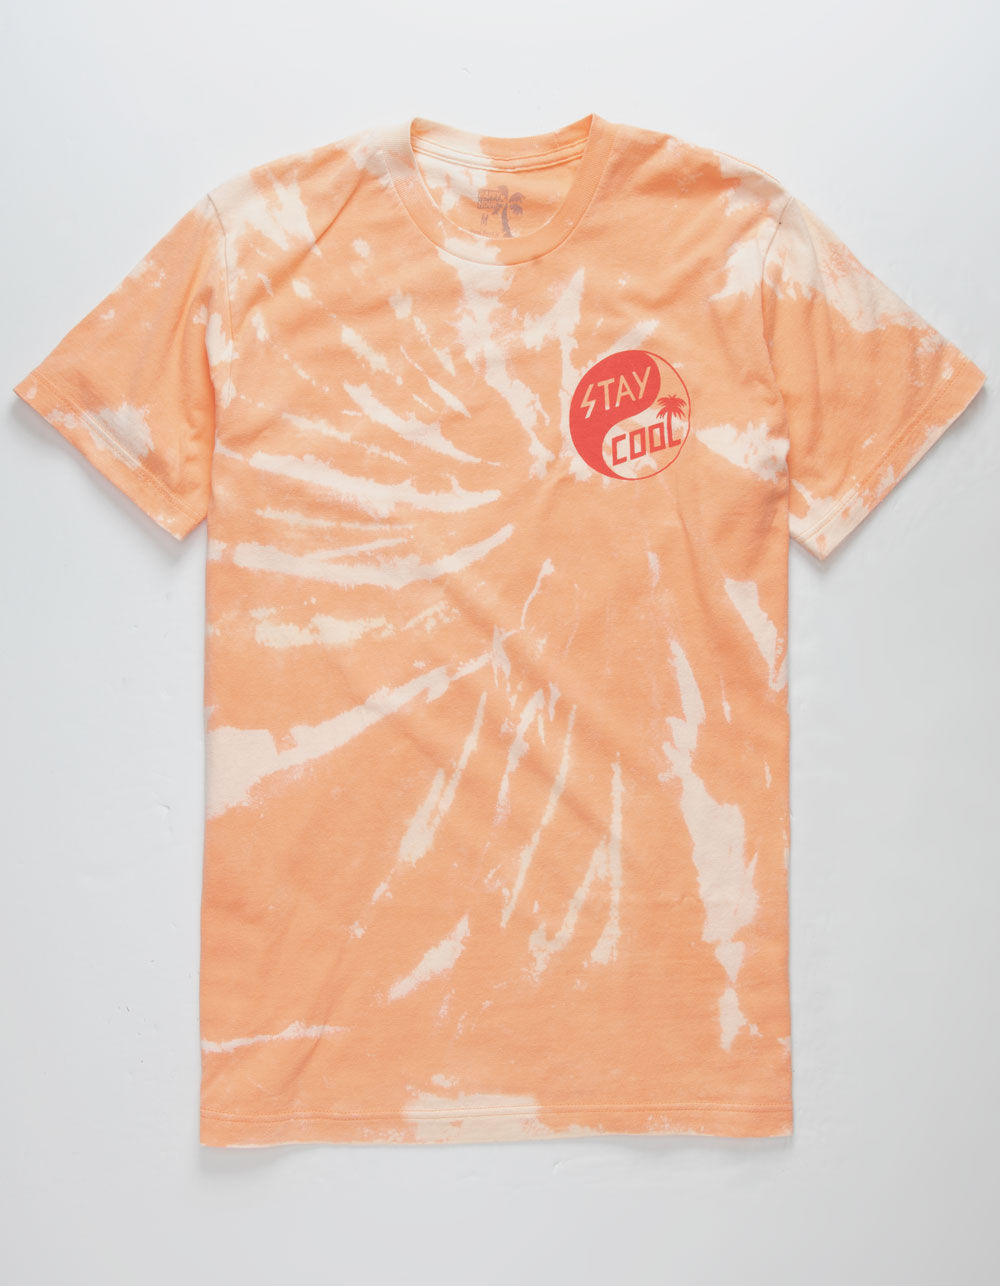 HAPPY HOUR Stay Cool Yin Yang Mens T-Shirt - CORAL | Tillys